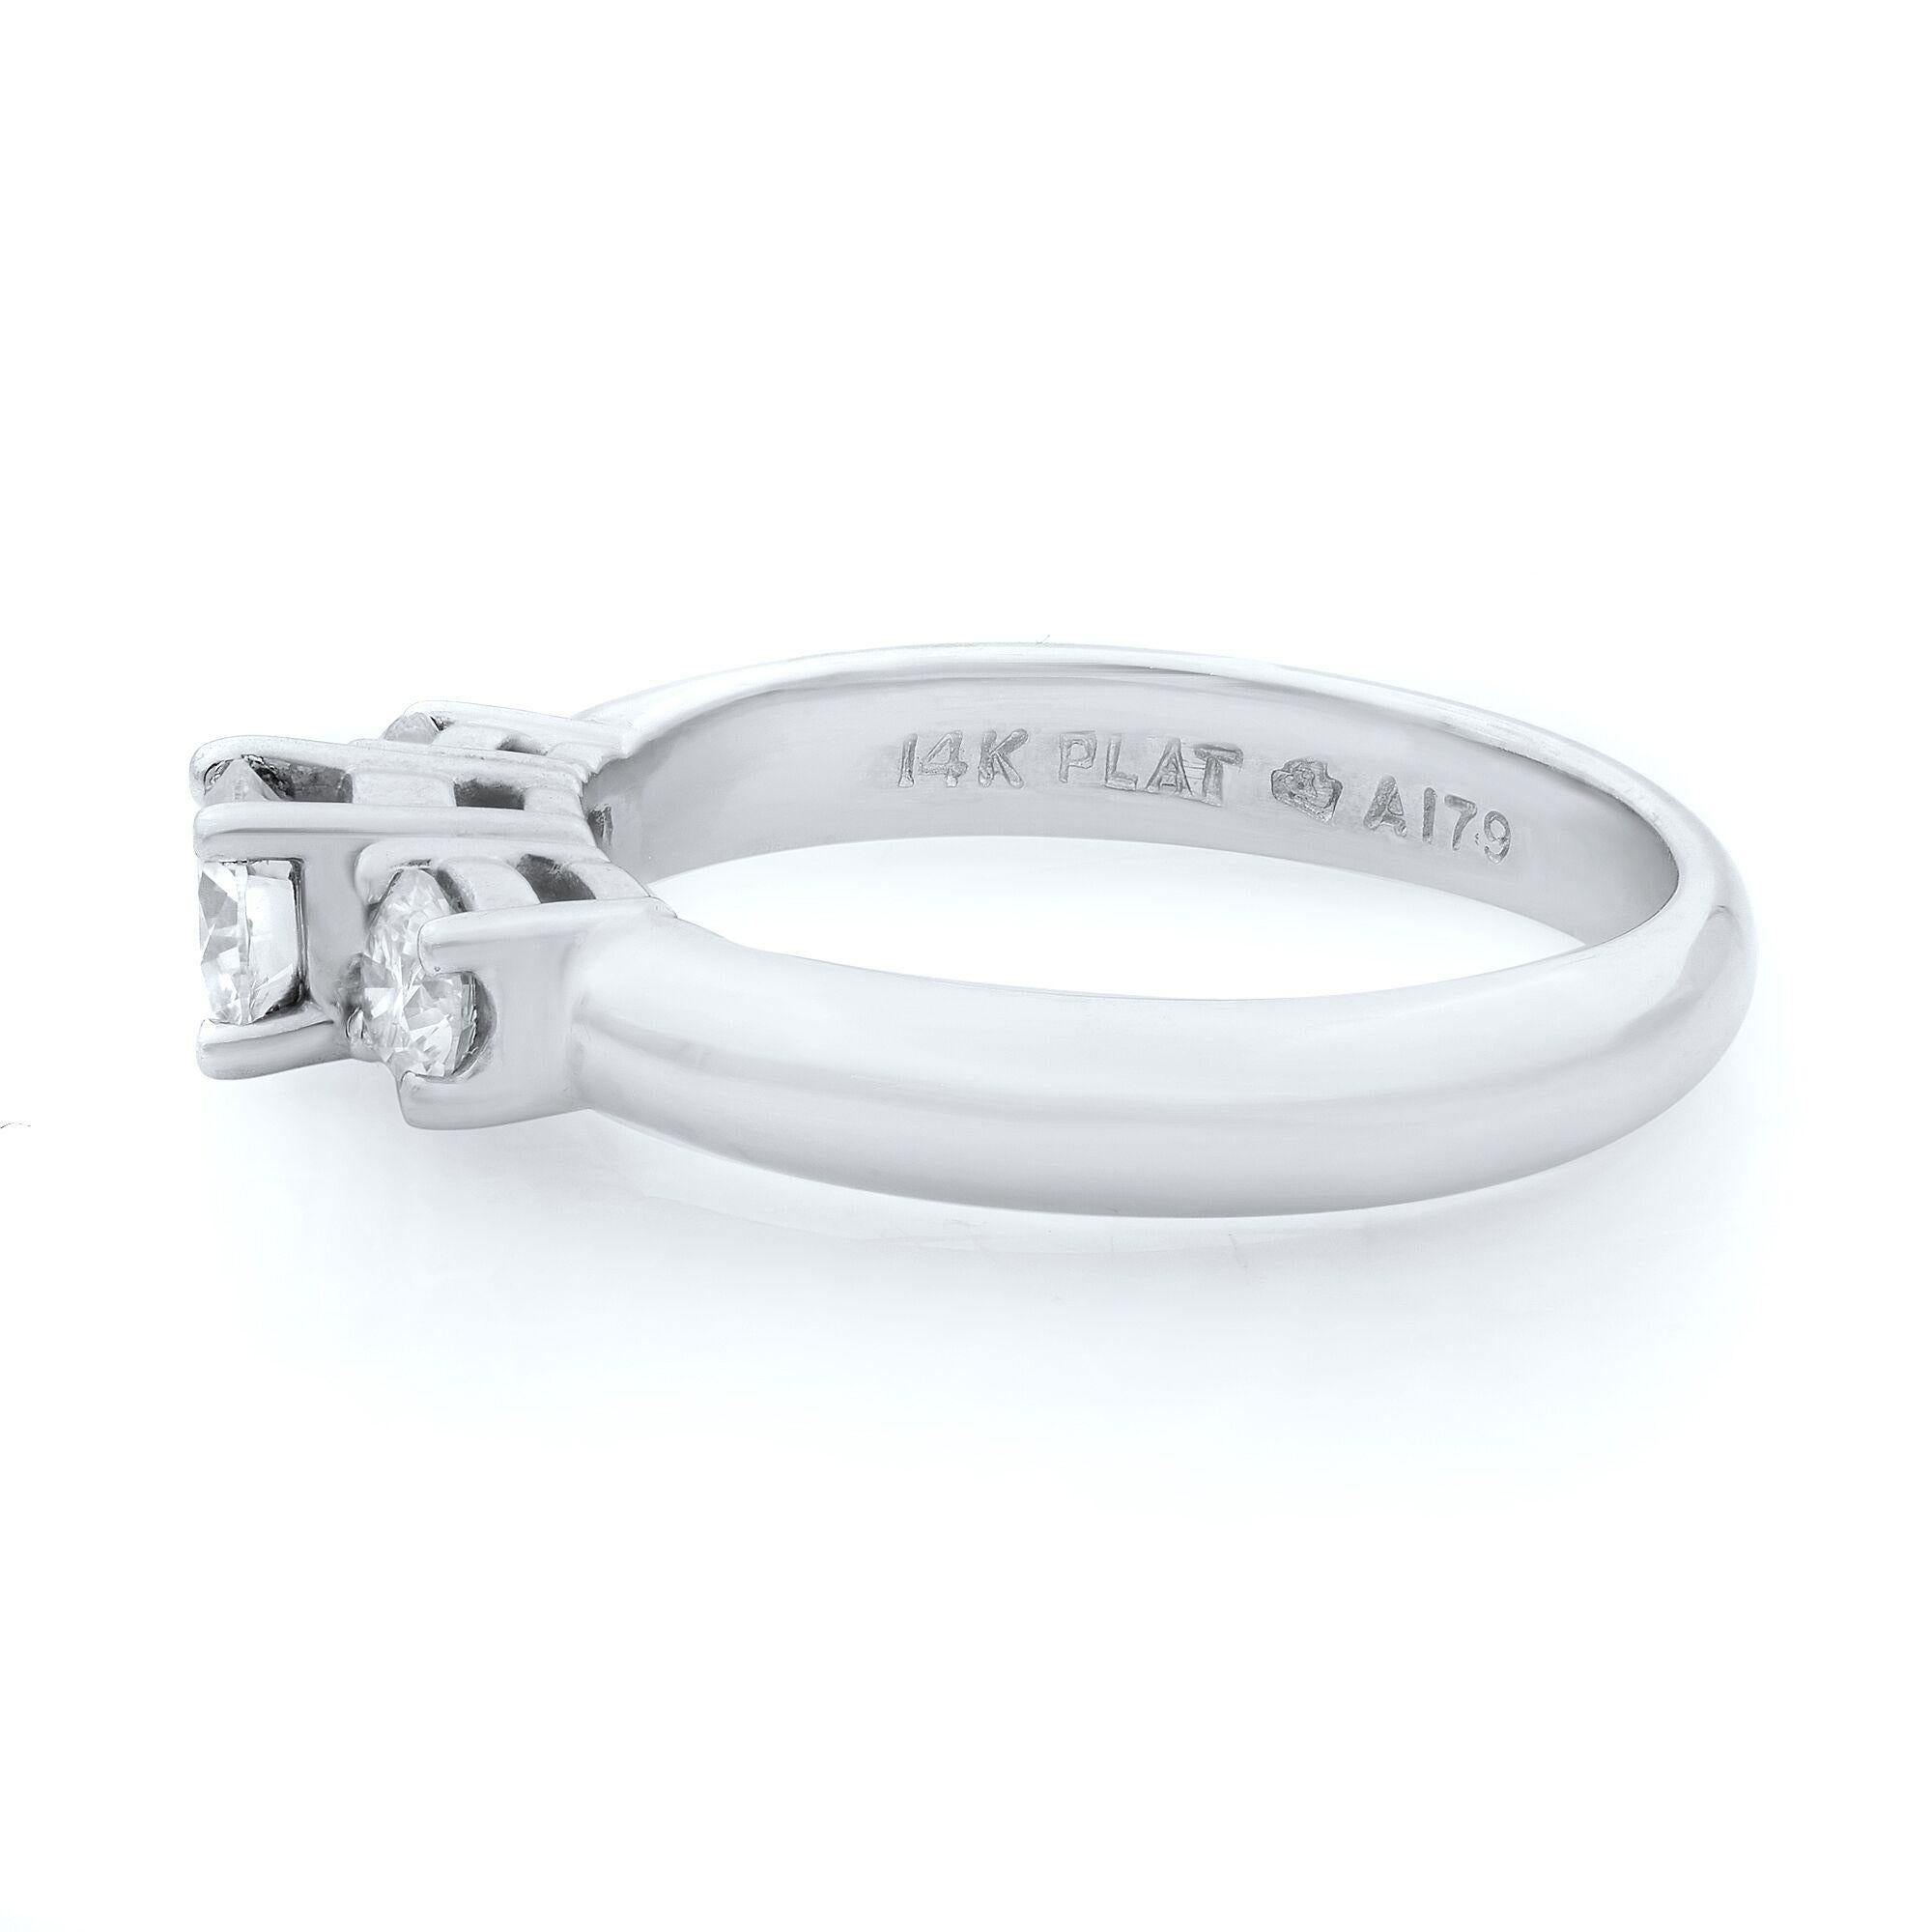 Simple three-stone round cut diamond engagement ring in 14k white gold and platinum. Diamonds are totaling 0.75 carats. The three stones are VS1 clarity and H color.  The ring size is 7.25. Comes in our presentation box. 
